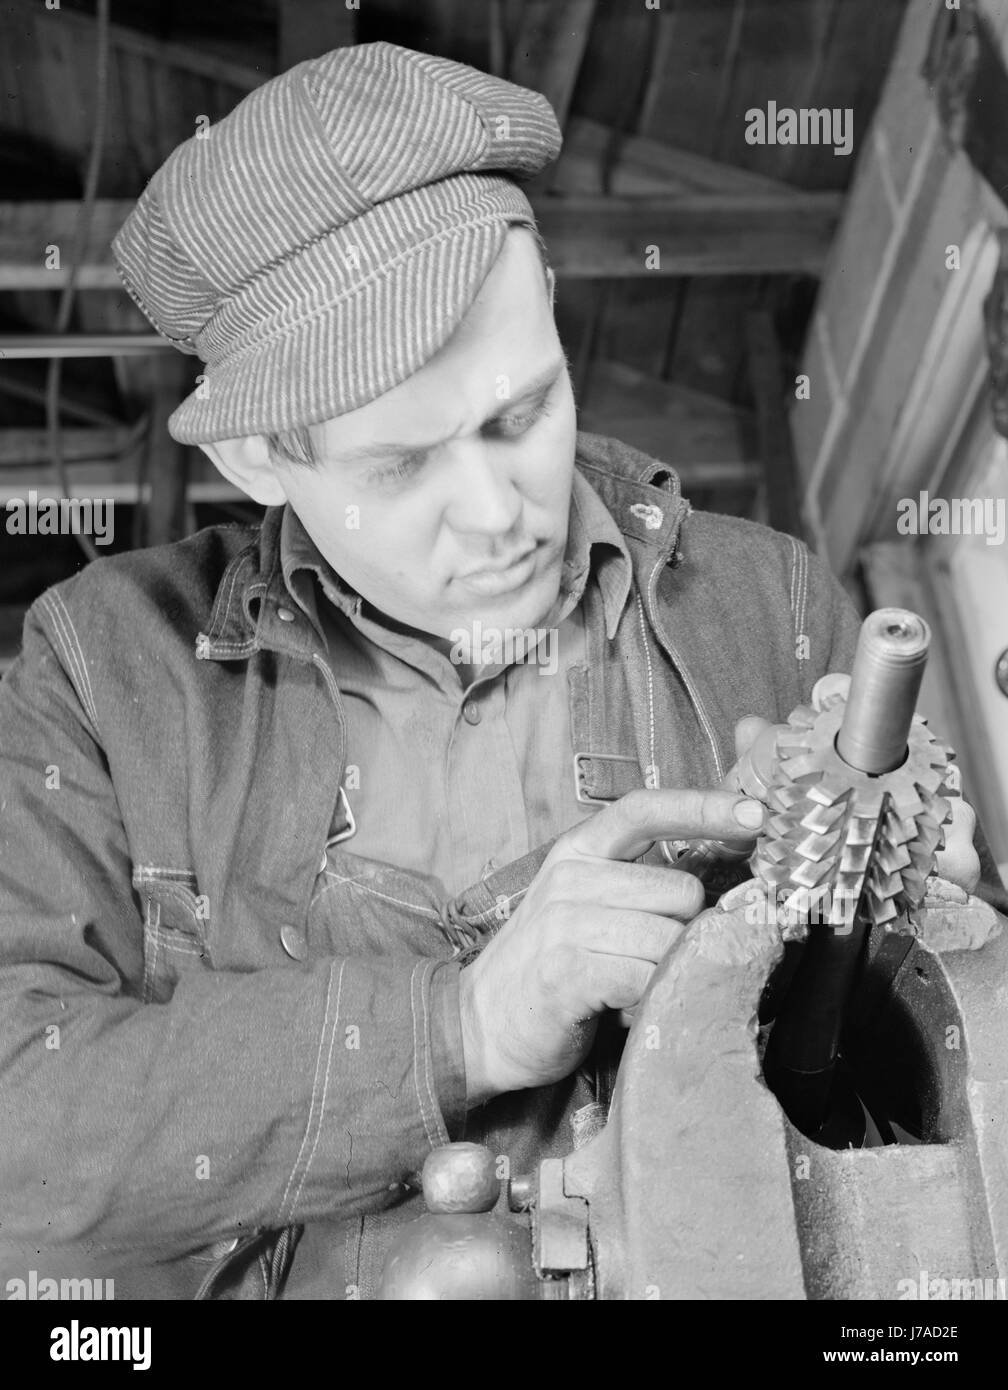 Man working in a small machine shop for war production, circa 1942. Stock Photo